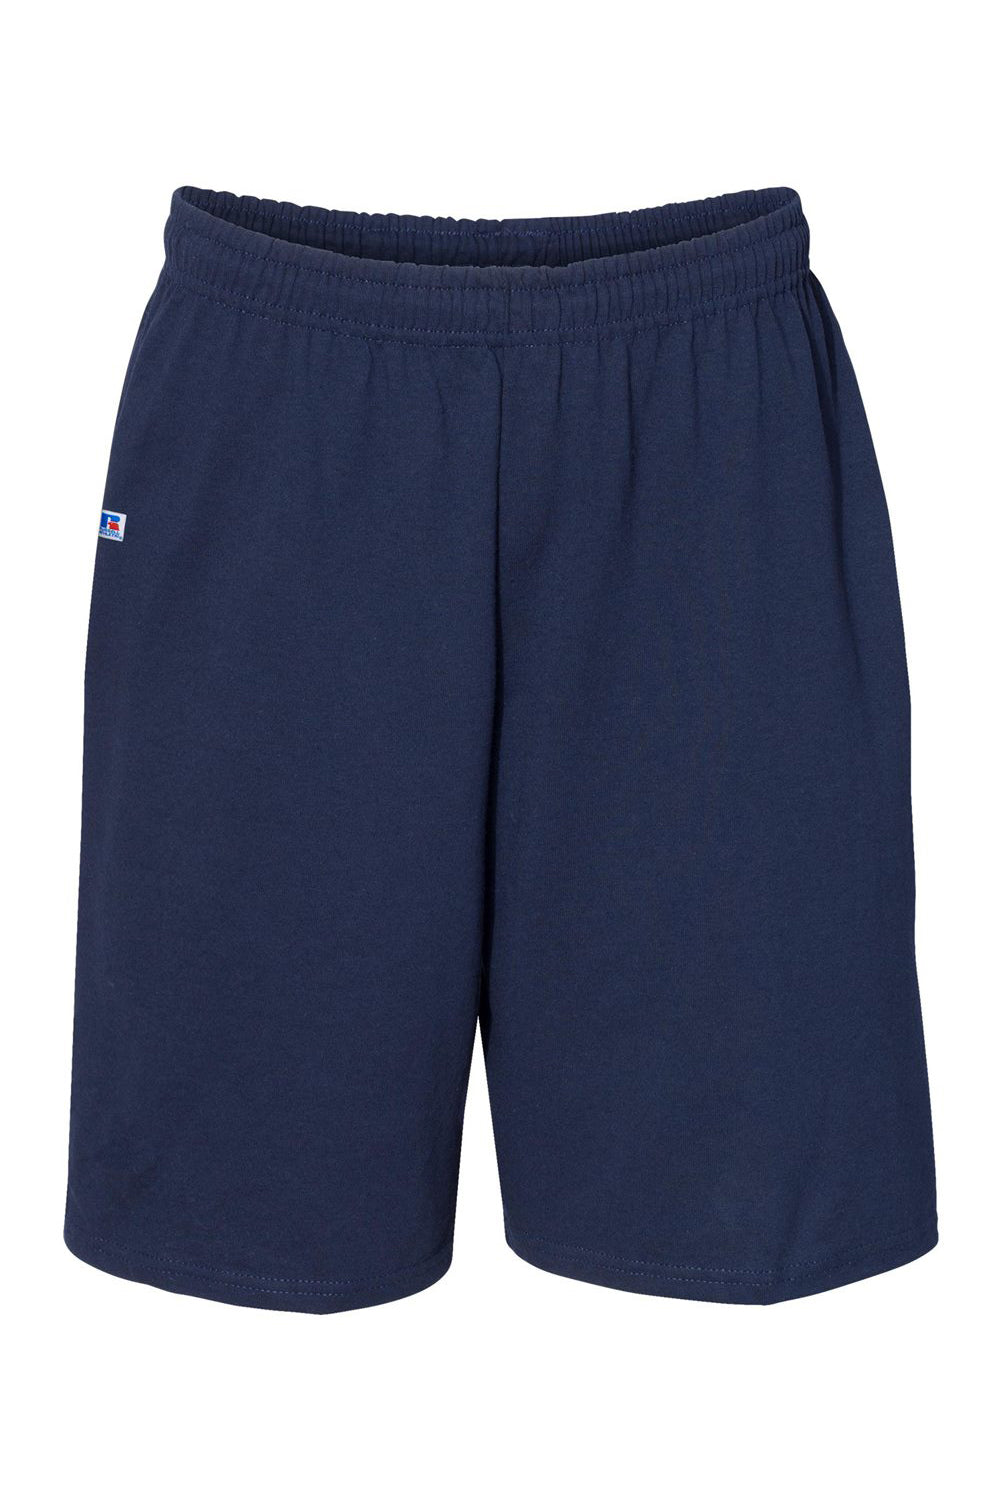 Russell Athletic 25843M Mens Classic Jersey Shorts w/ Pockets Navy Blue Flat Front